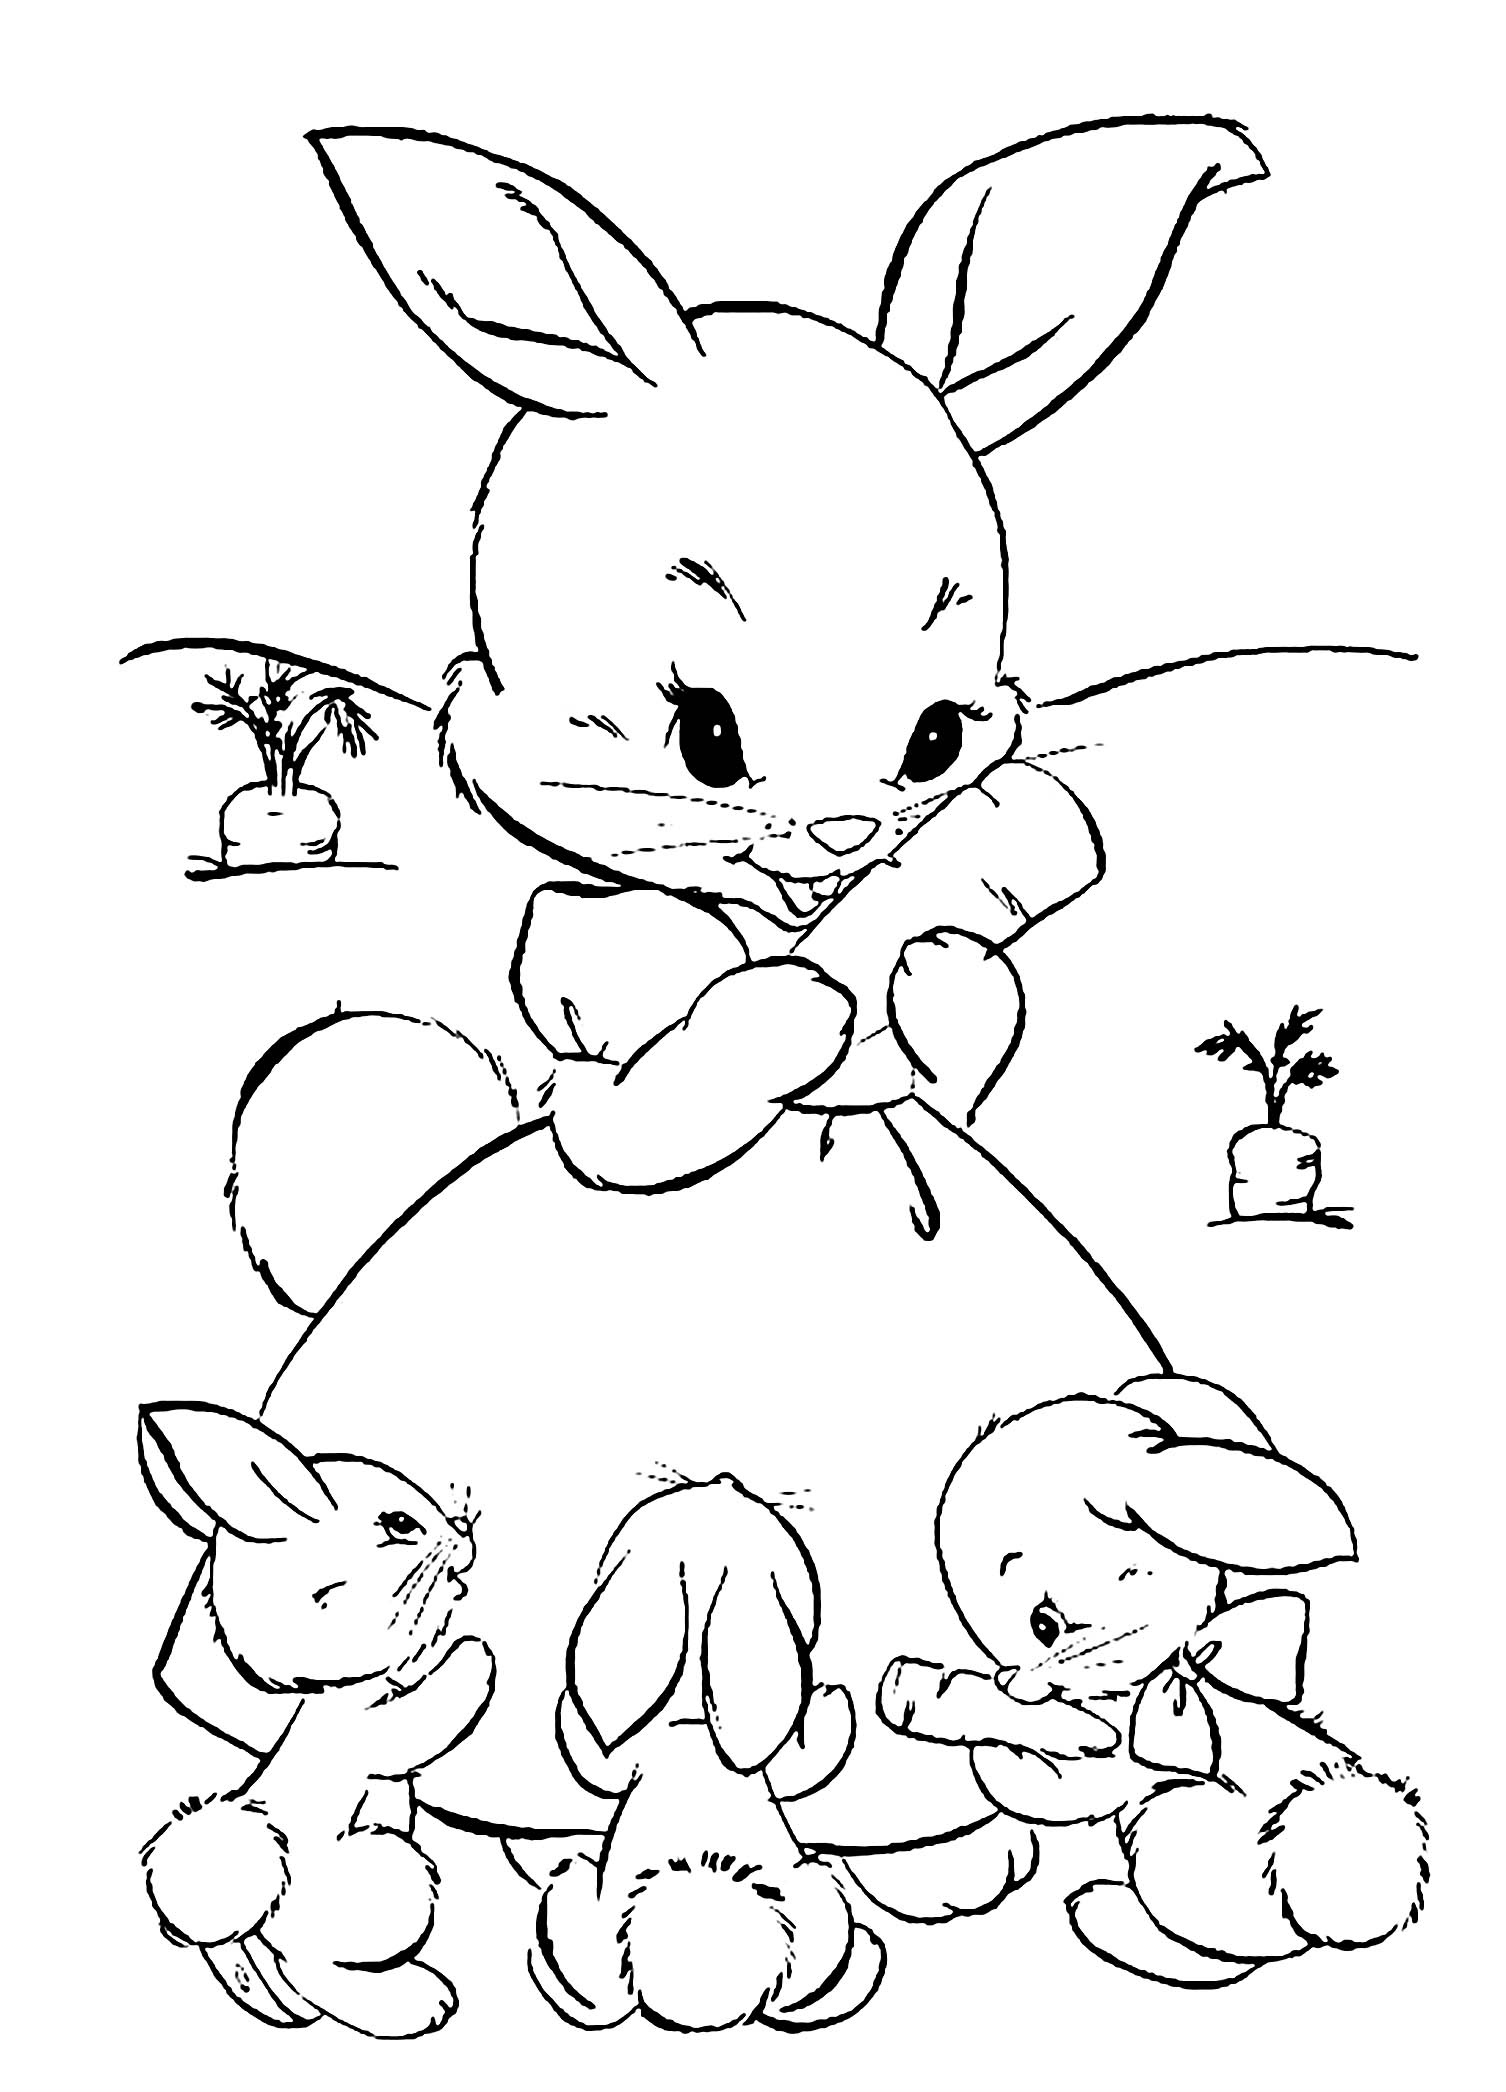 Rabbit free to color for kids - Rabbit Kids Coloring Pages